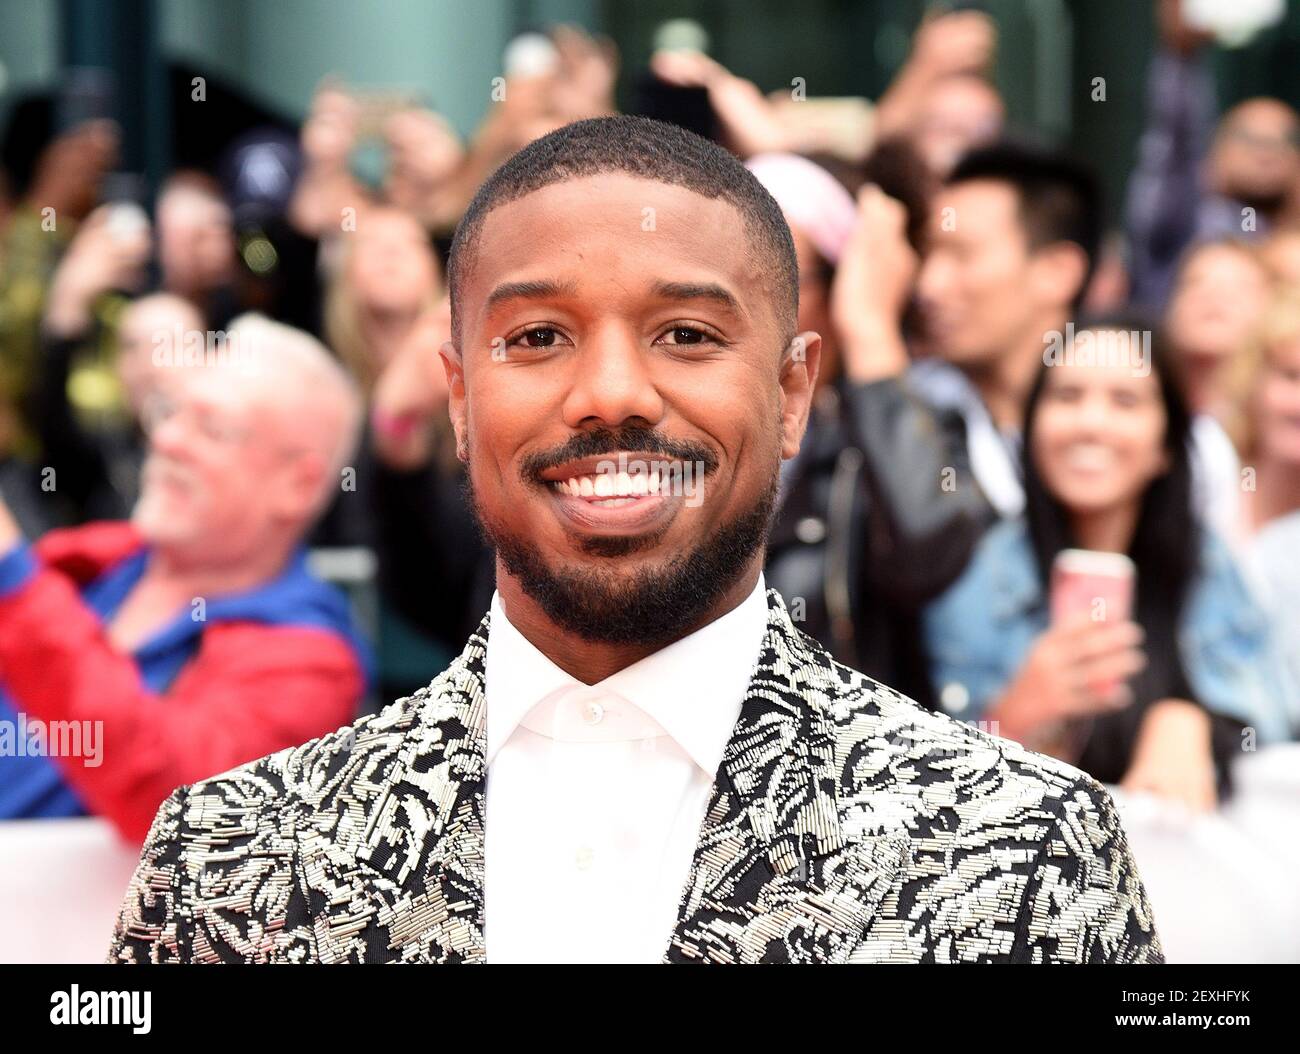 TORONTO, ONTARIO - SEPTEMBER 06: Michael B. Jordan attends the 'Just Mercy' premiere during the 2019 Toronto International Film Festival at Roy Thomson Hall on September 06, 2019 in Toronto, Canada. (Photo by imageSPACE/Sipa USA) Stock Photo